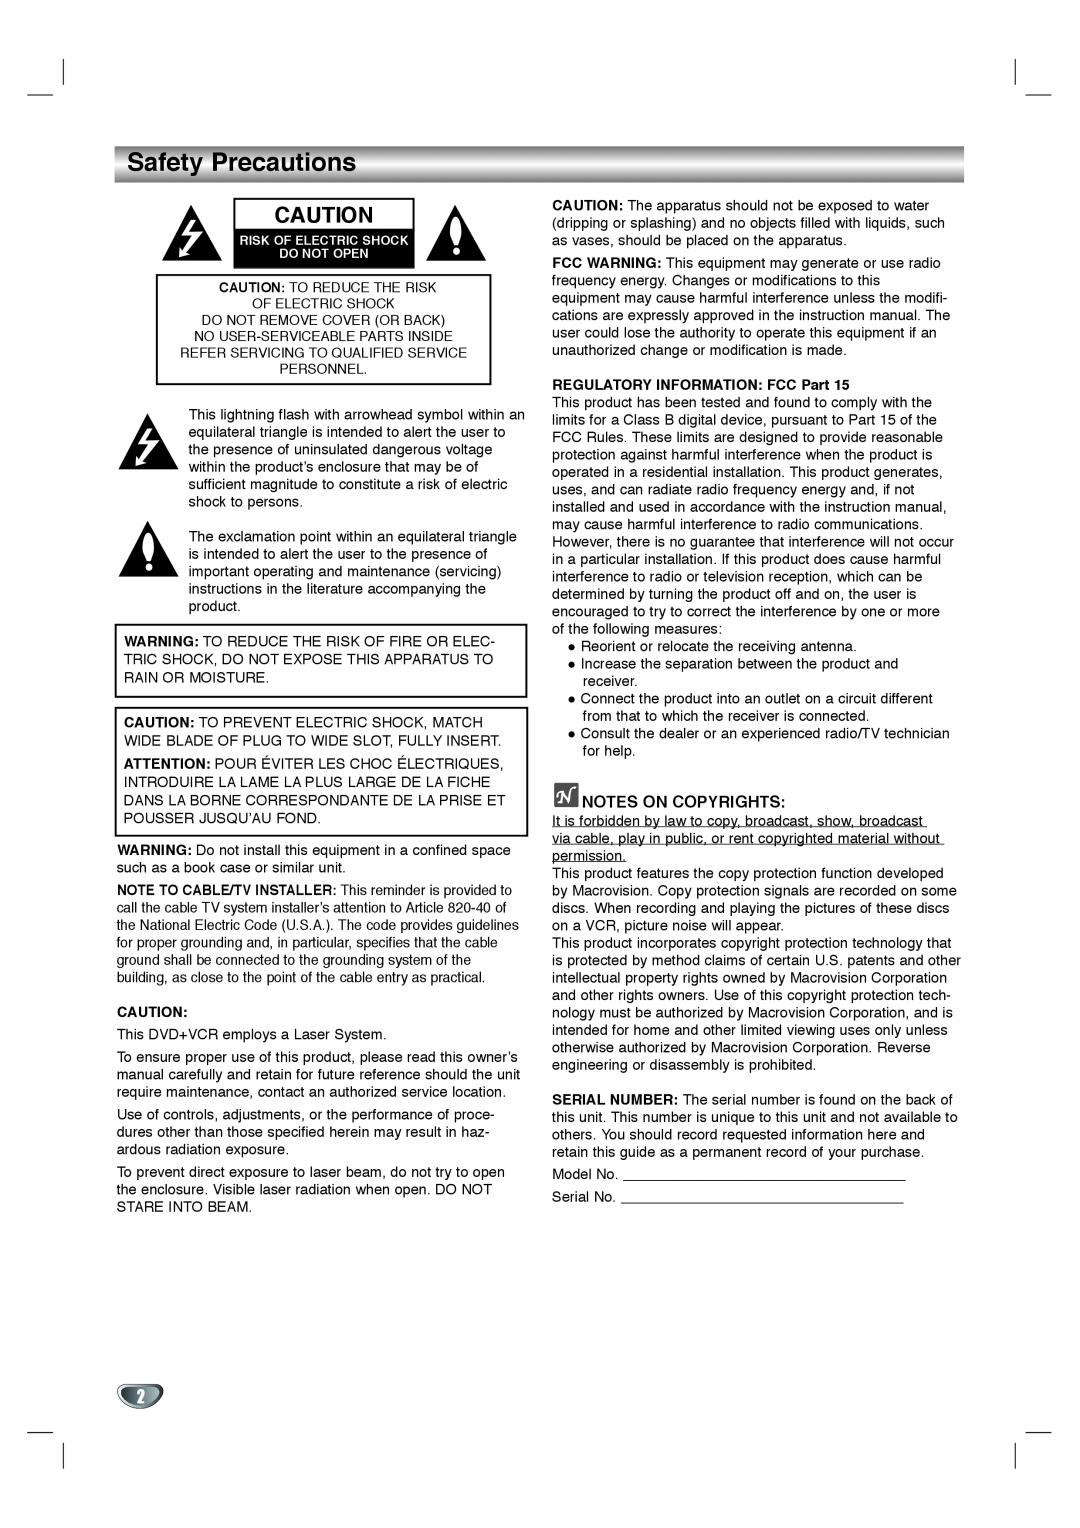 Toshiba SD-K530SU owner manual Safety Precautions, Notes On Copyrights, REGULATORY INFORMATION FCC Part 